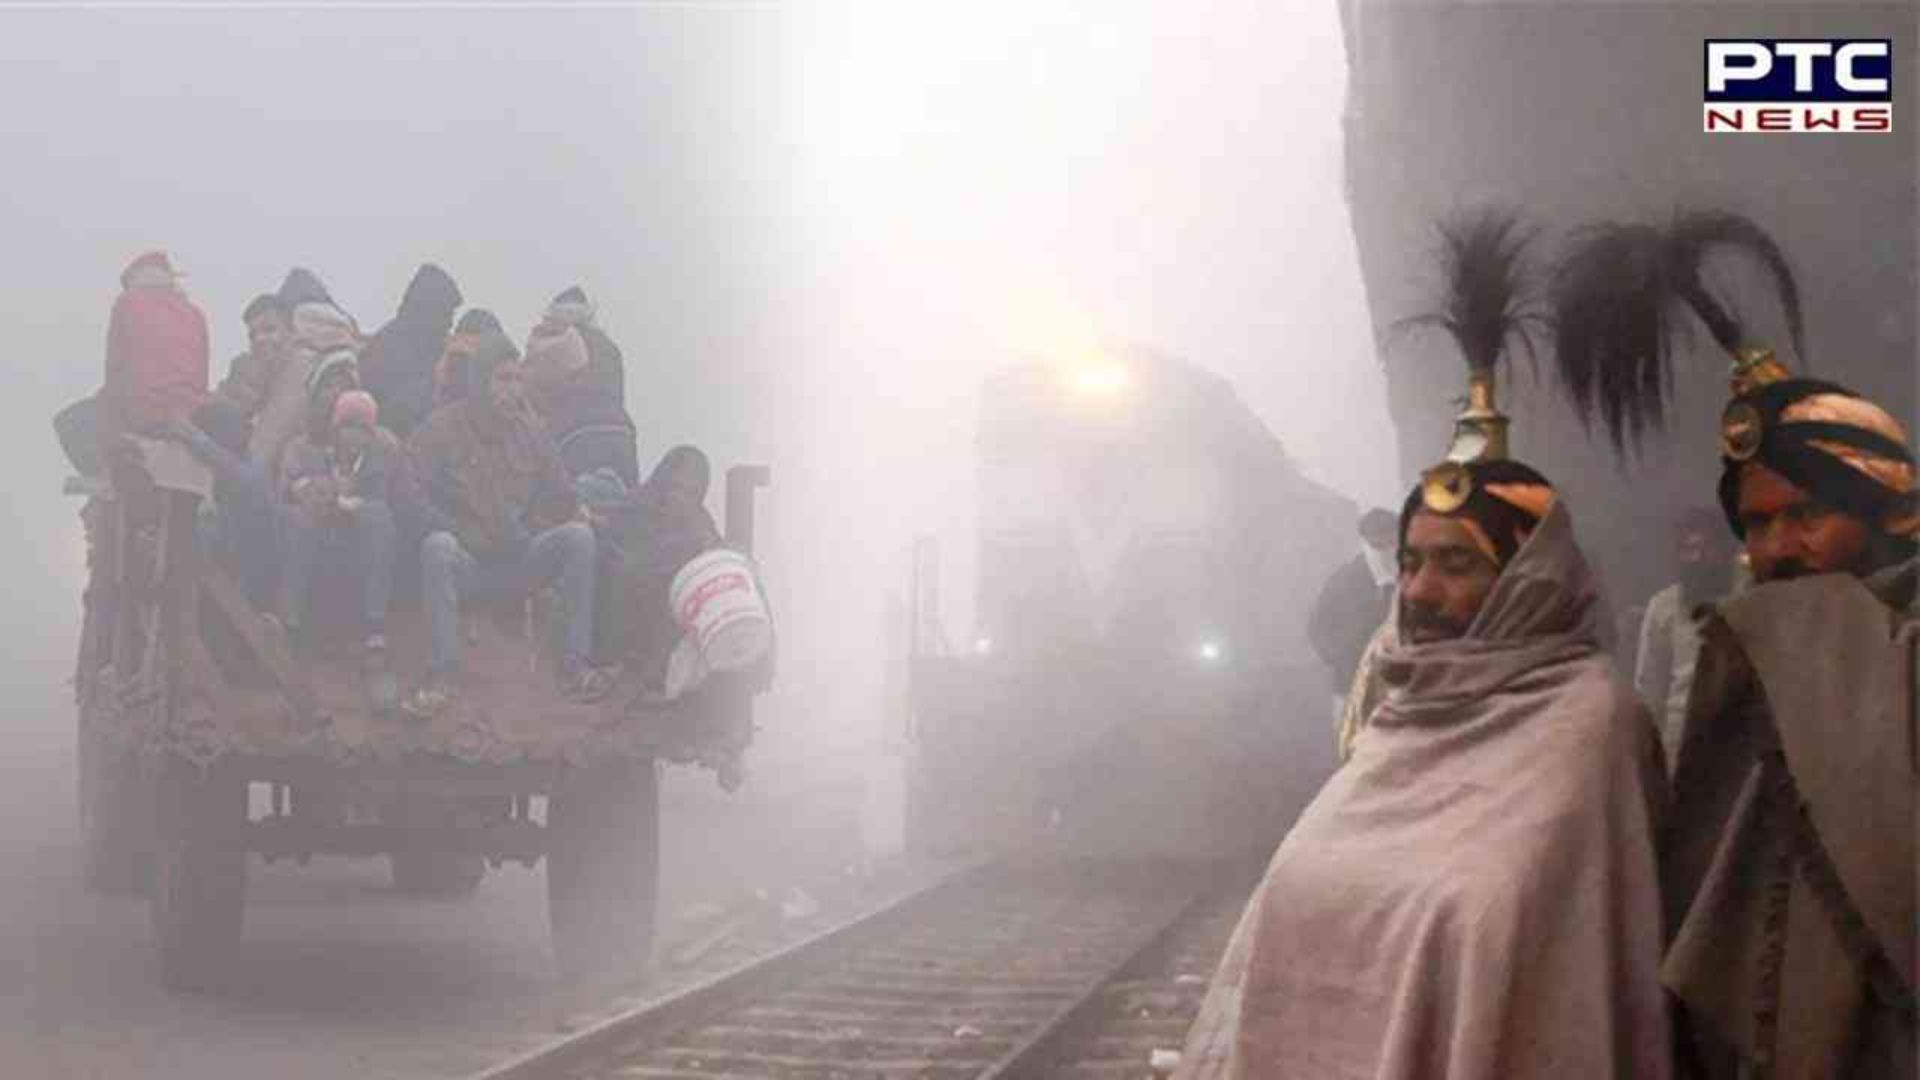 North India weather update: Punjab, Haryana & Delhi continue to reel under cold conditions, IMD issues fog alert